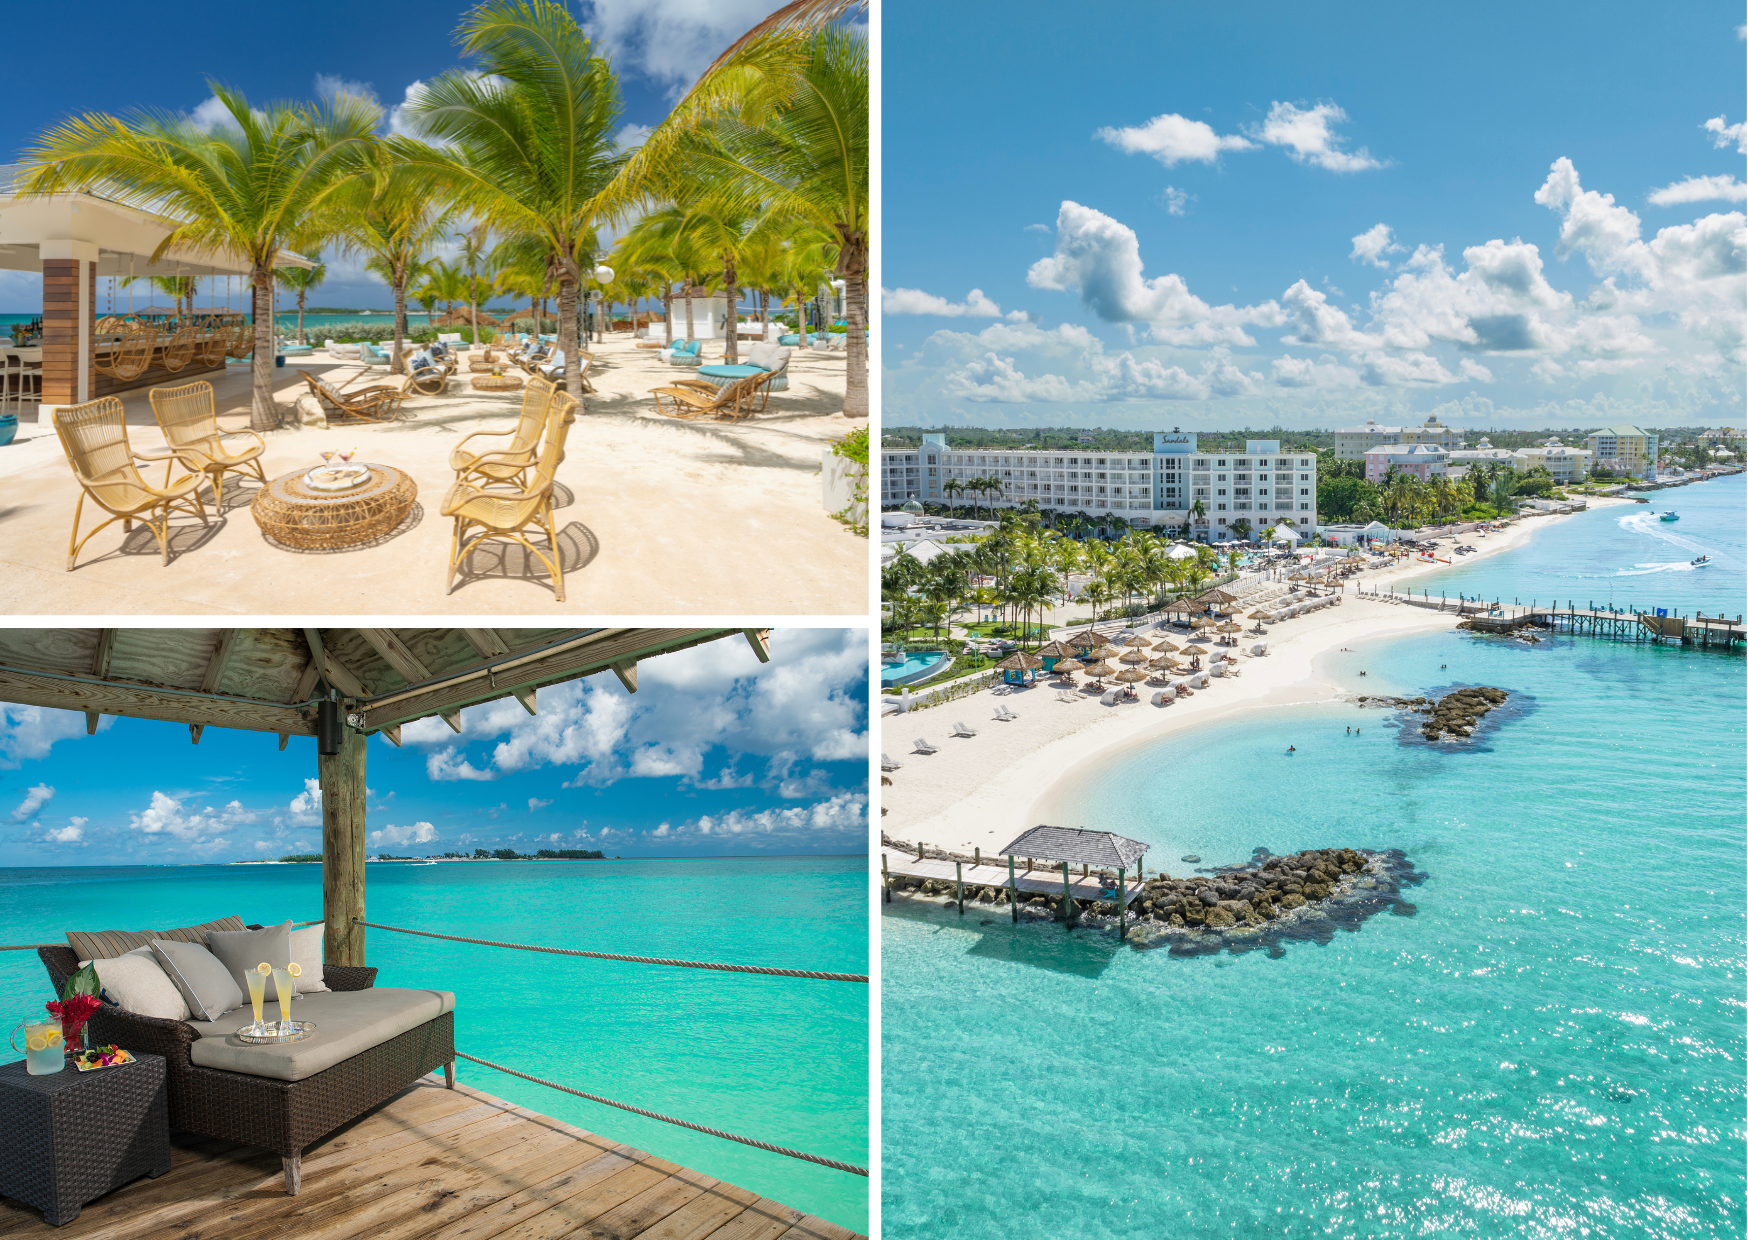 Win a luxury all-inclusive holiday for two to the Bahamas with Sandals Resorts!